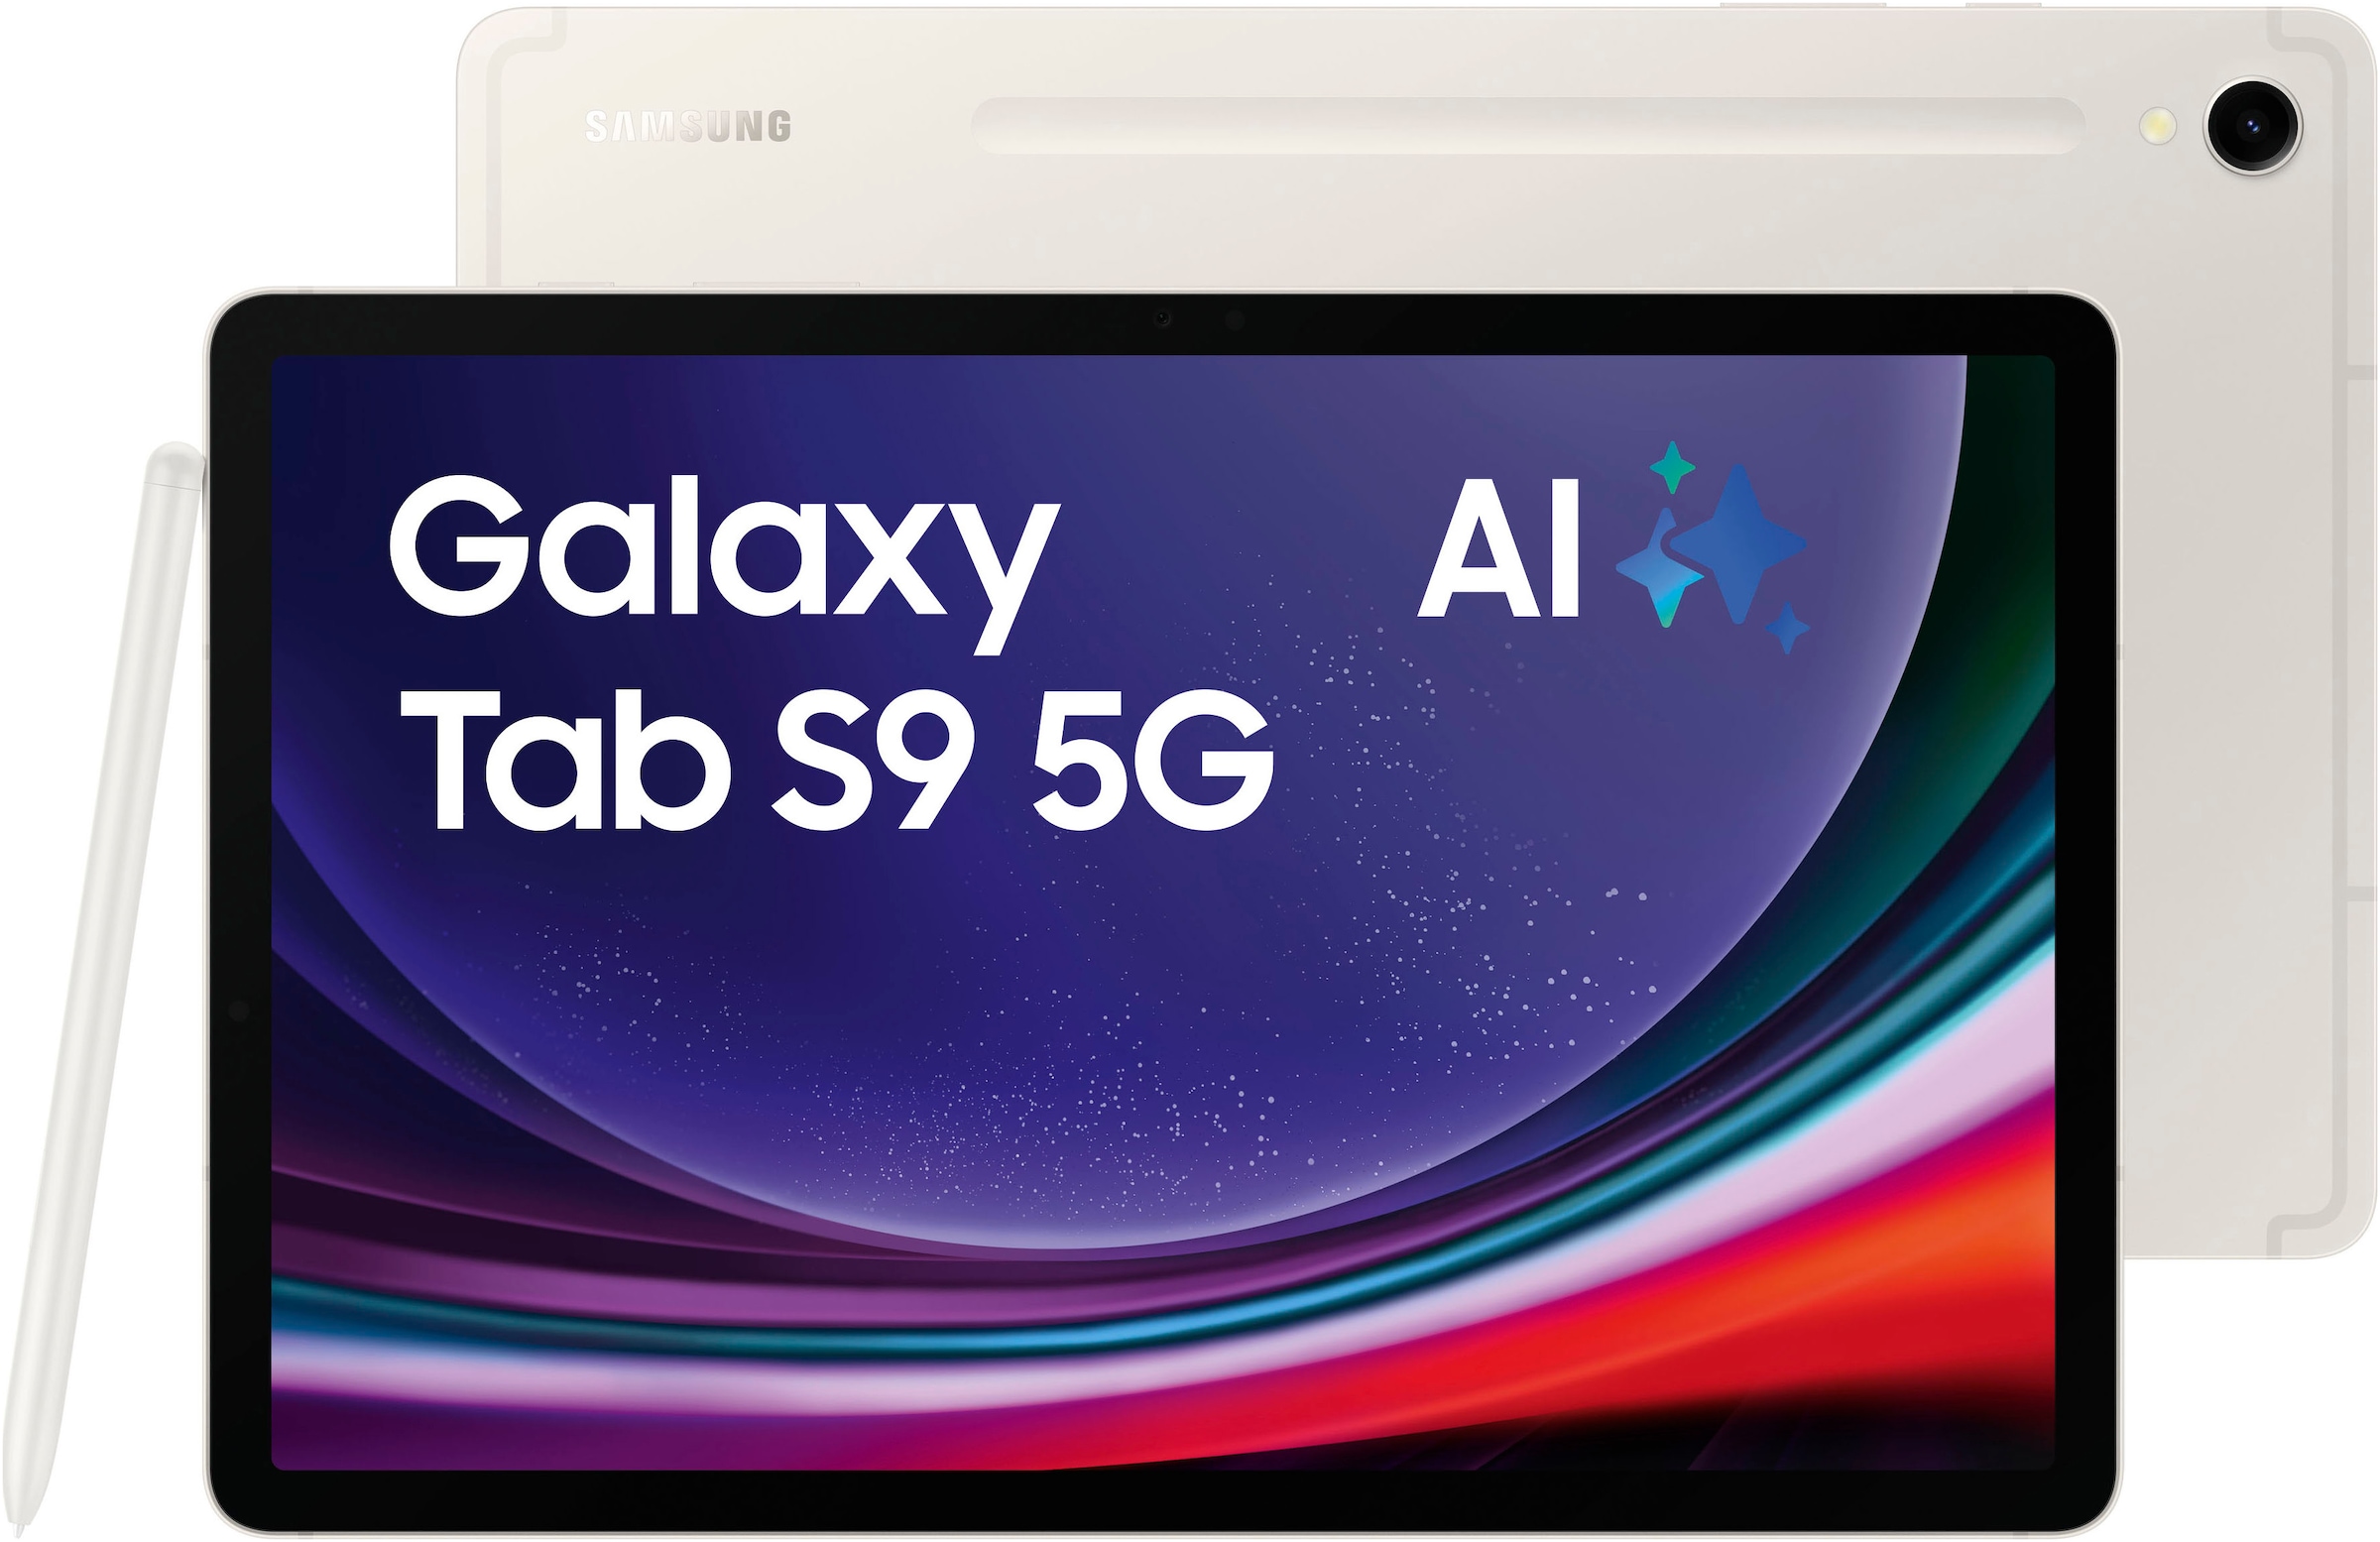 Tablet »Galaxy Tab S9 5G«, (Android AI-Funktionen)